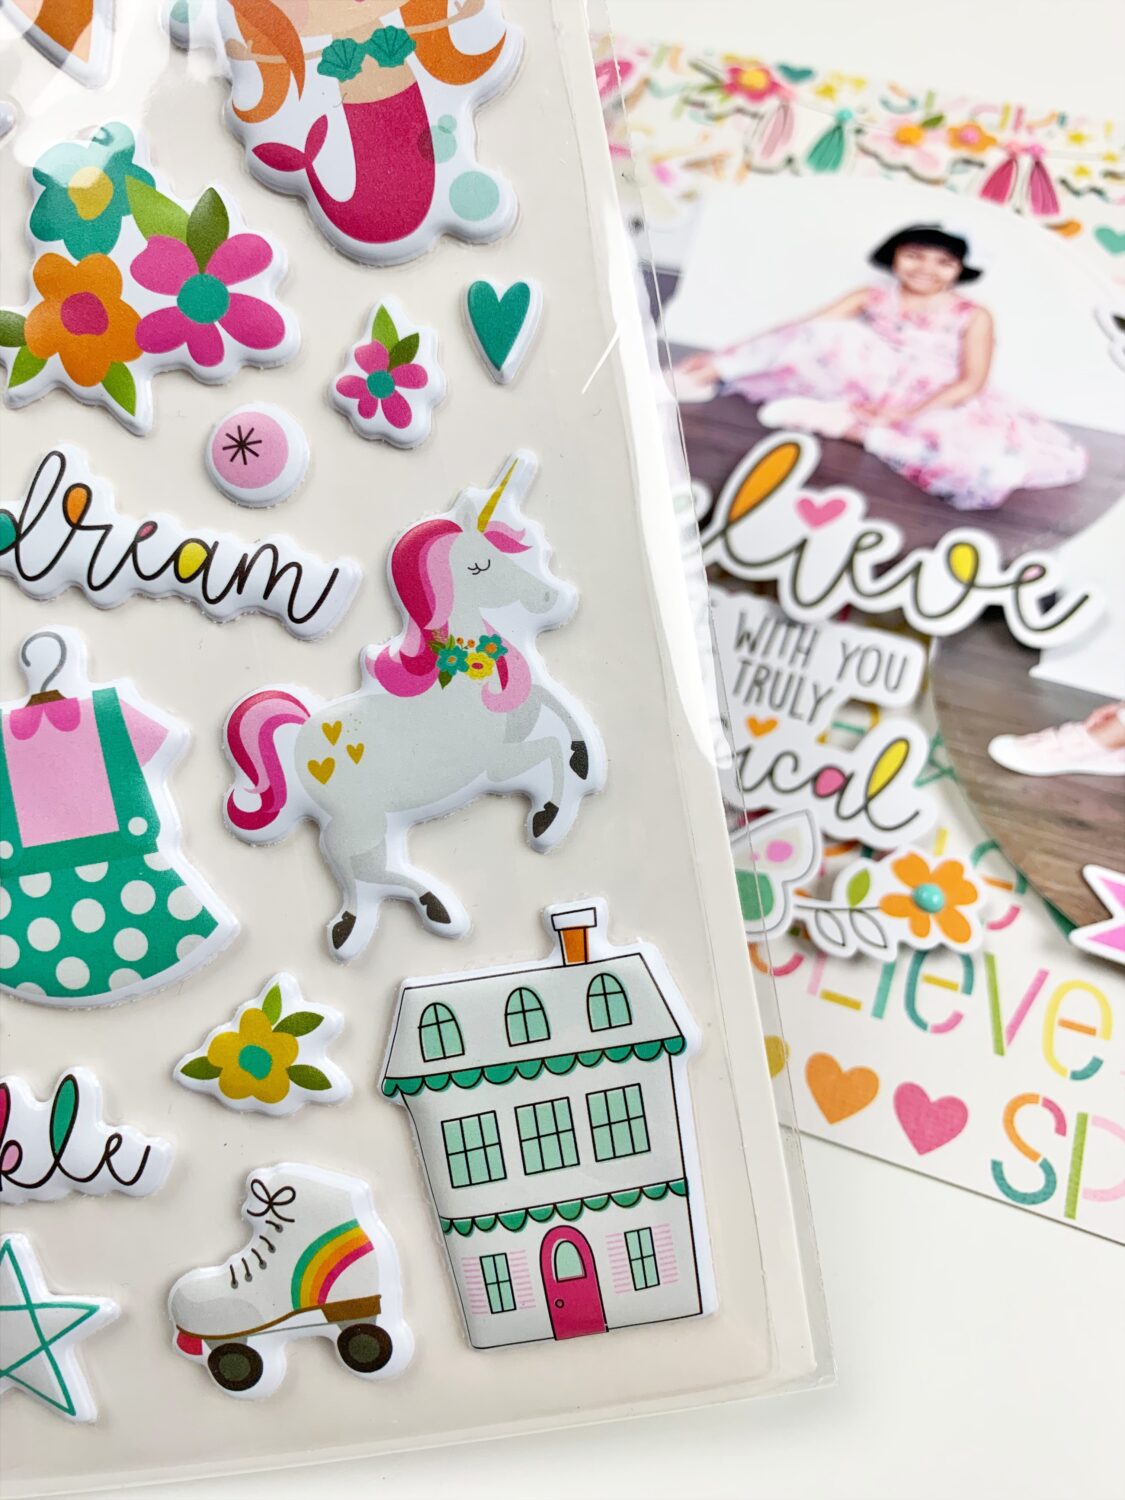 Use embellishments and stickers to decorate the image of the shadow box.  #tombow #shadowbox